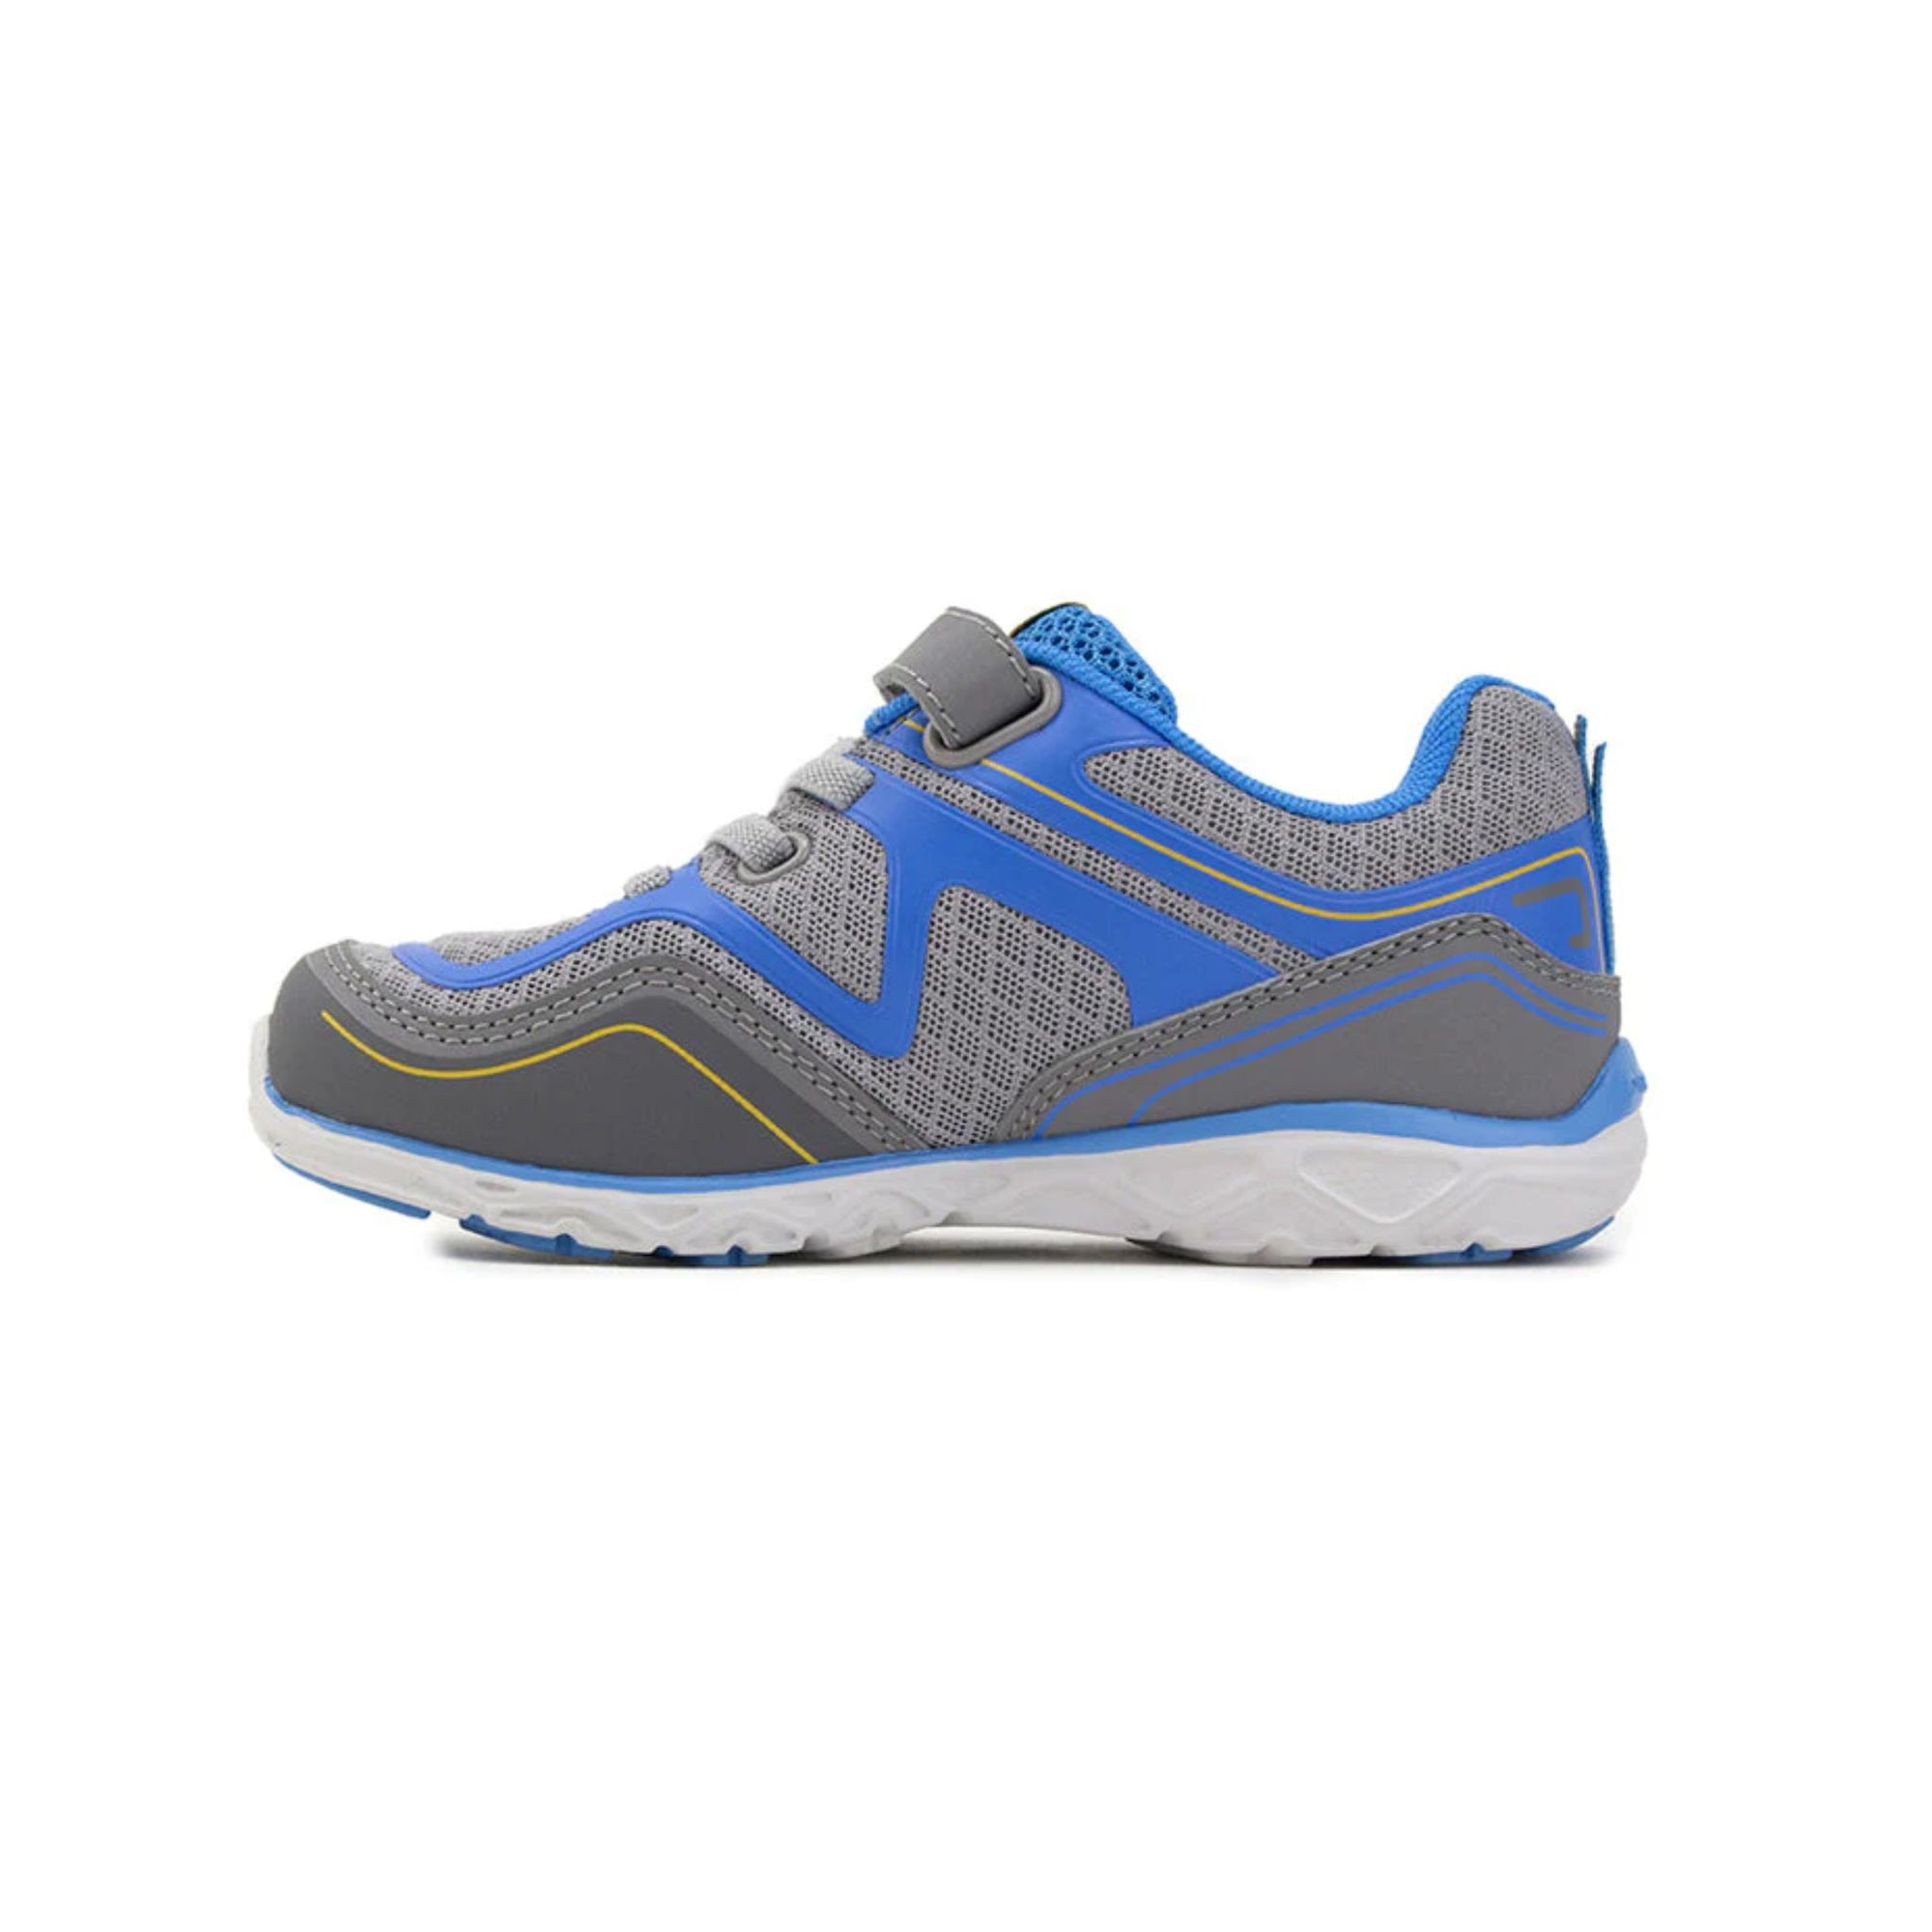 Pediped Flex Force Grey Blue Athletic Shoes